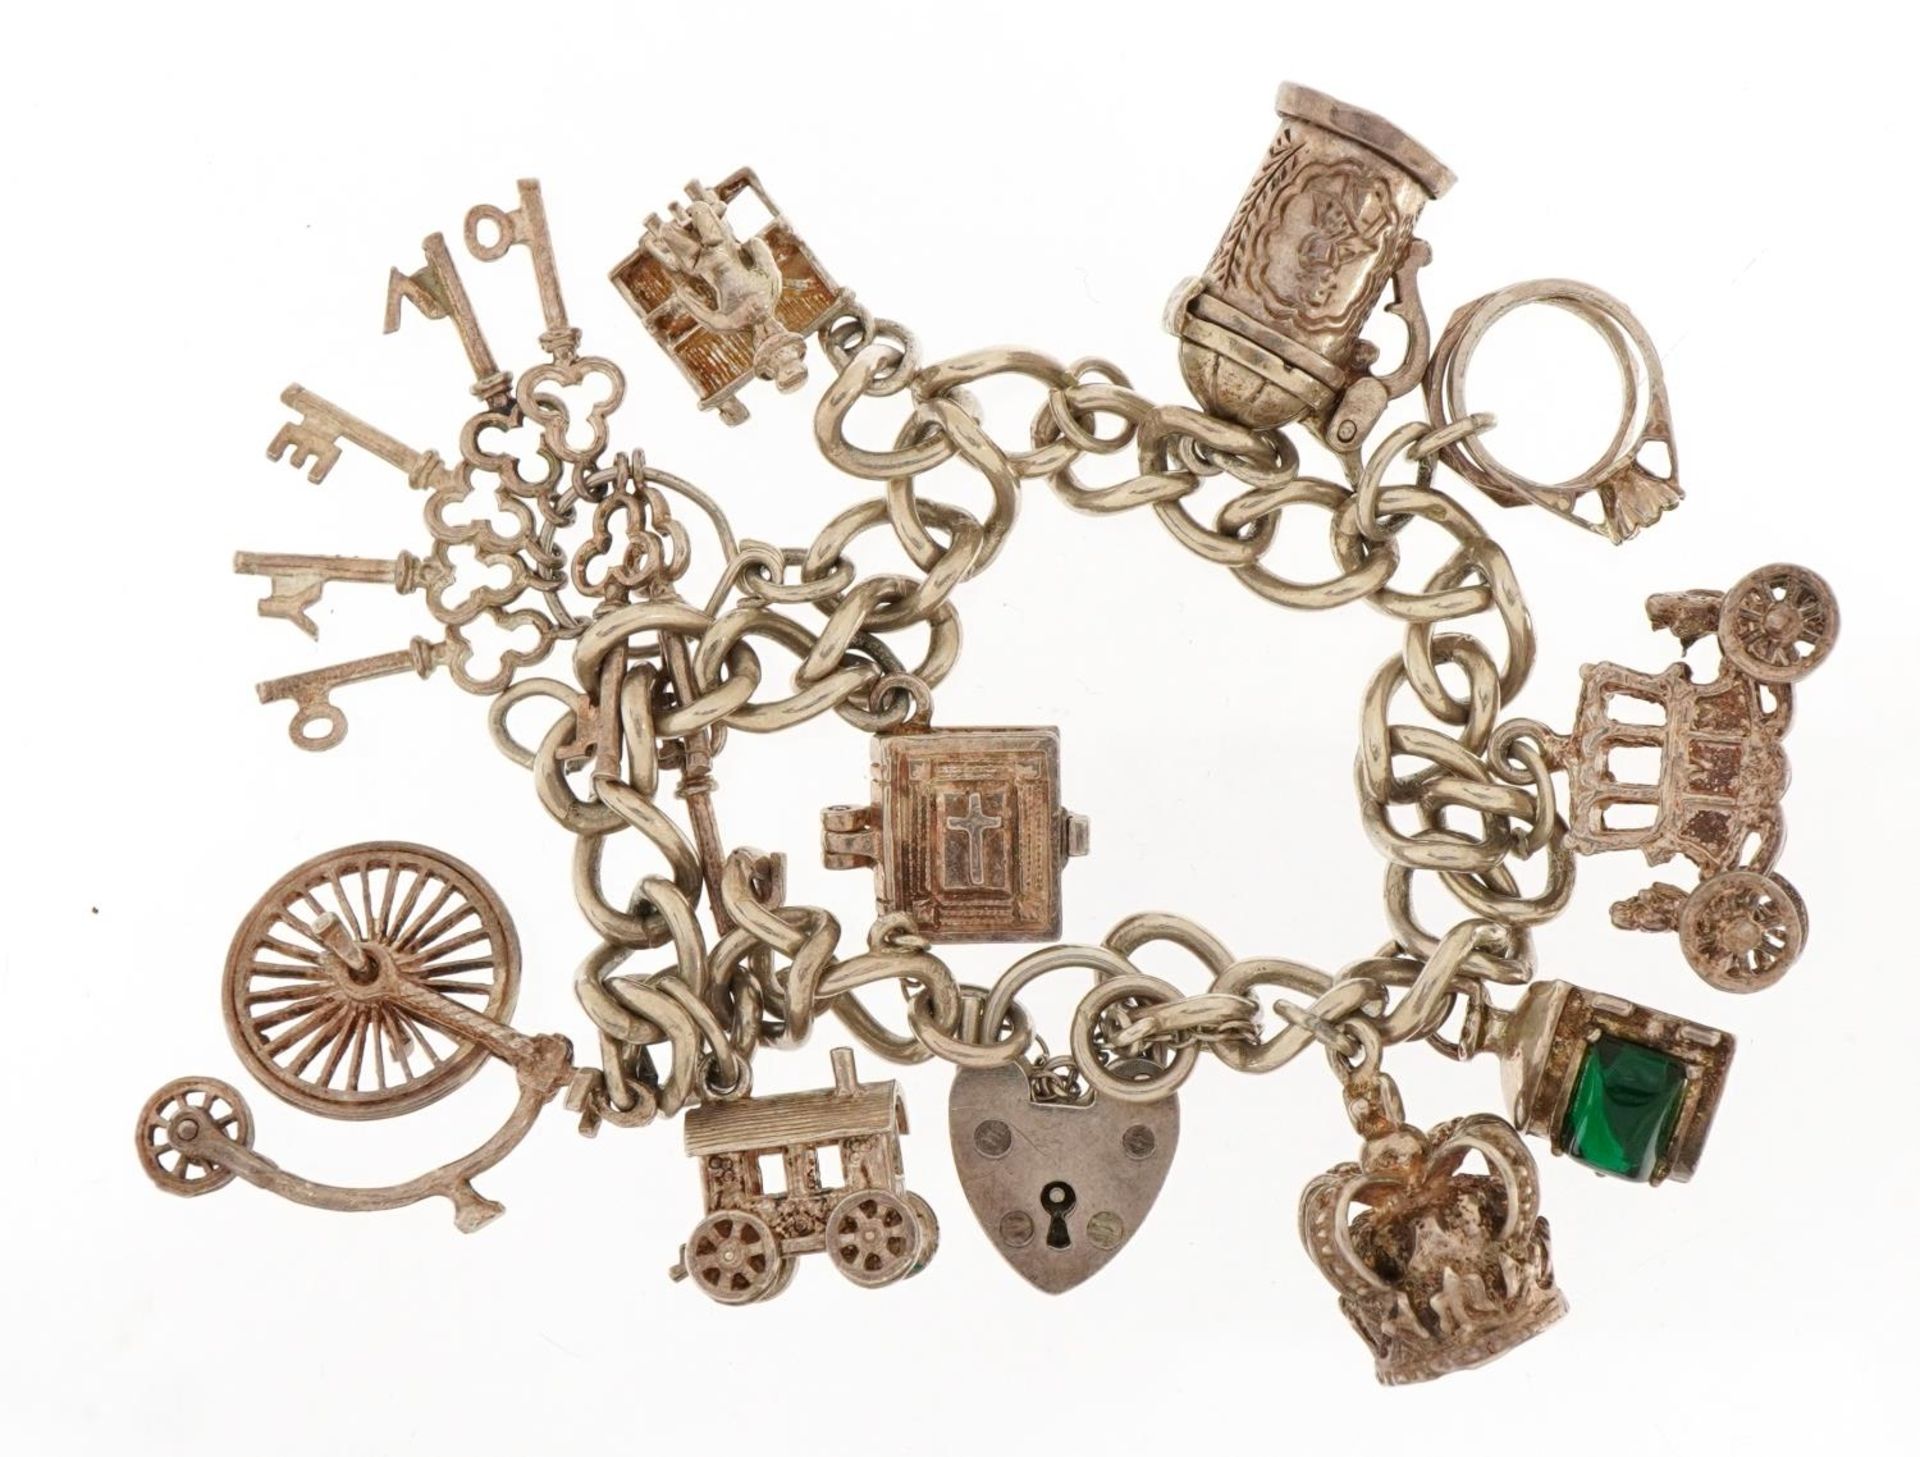 Silver charm bracelet with a selection of mostly silver charms including Penny Farthing, carriage